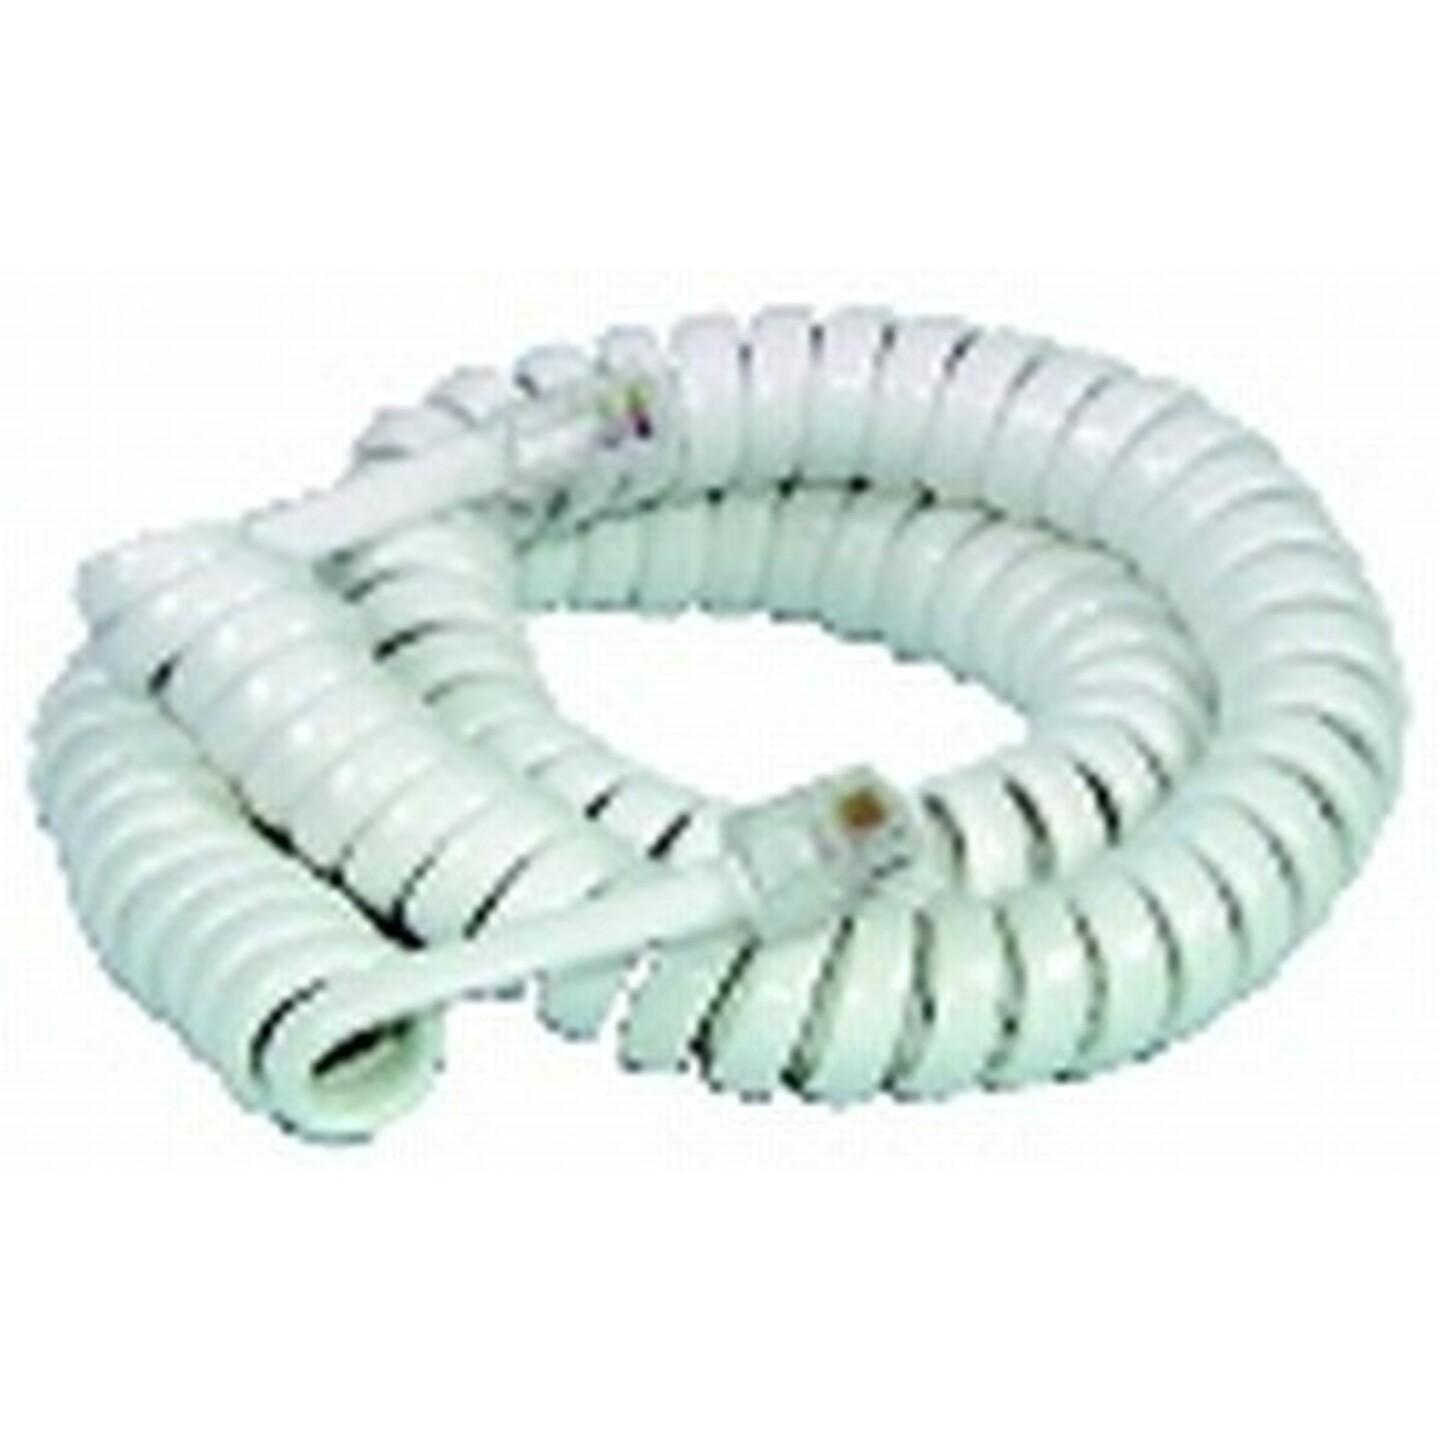 8m Replacement Handset Curly Cord With 4P/4C US Modular Plugs